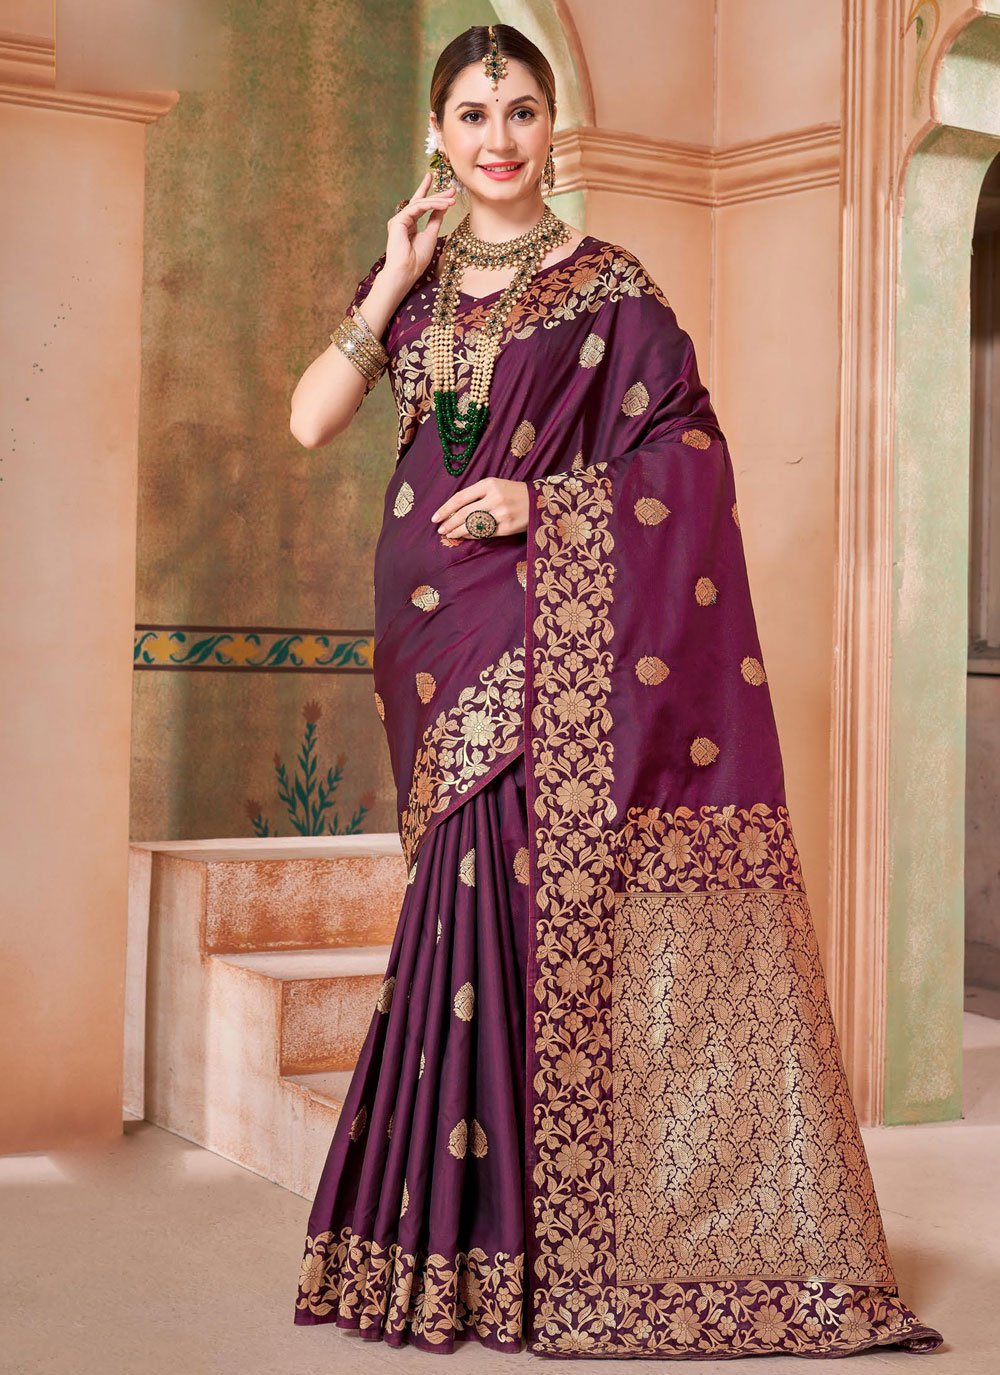 Lowest price  $12 - $24 - Violet Ready Pleated Saree and Violet Ready  Pleated Sari online shopping